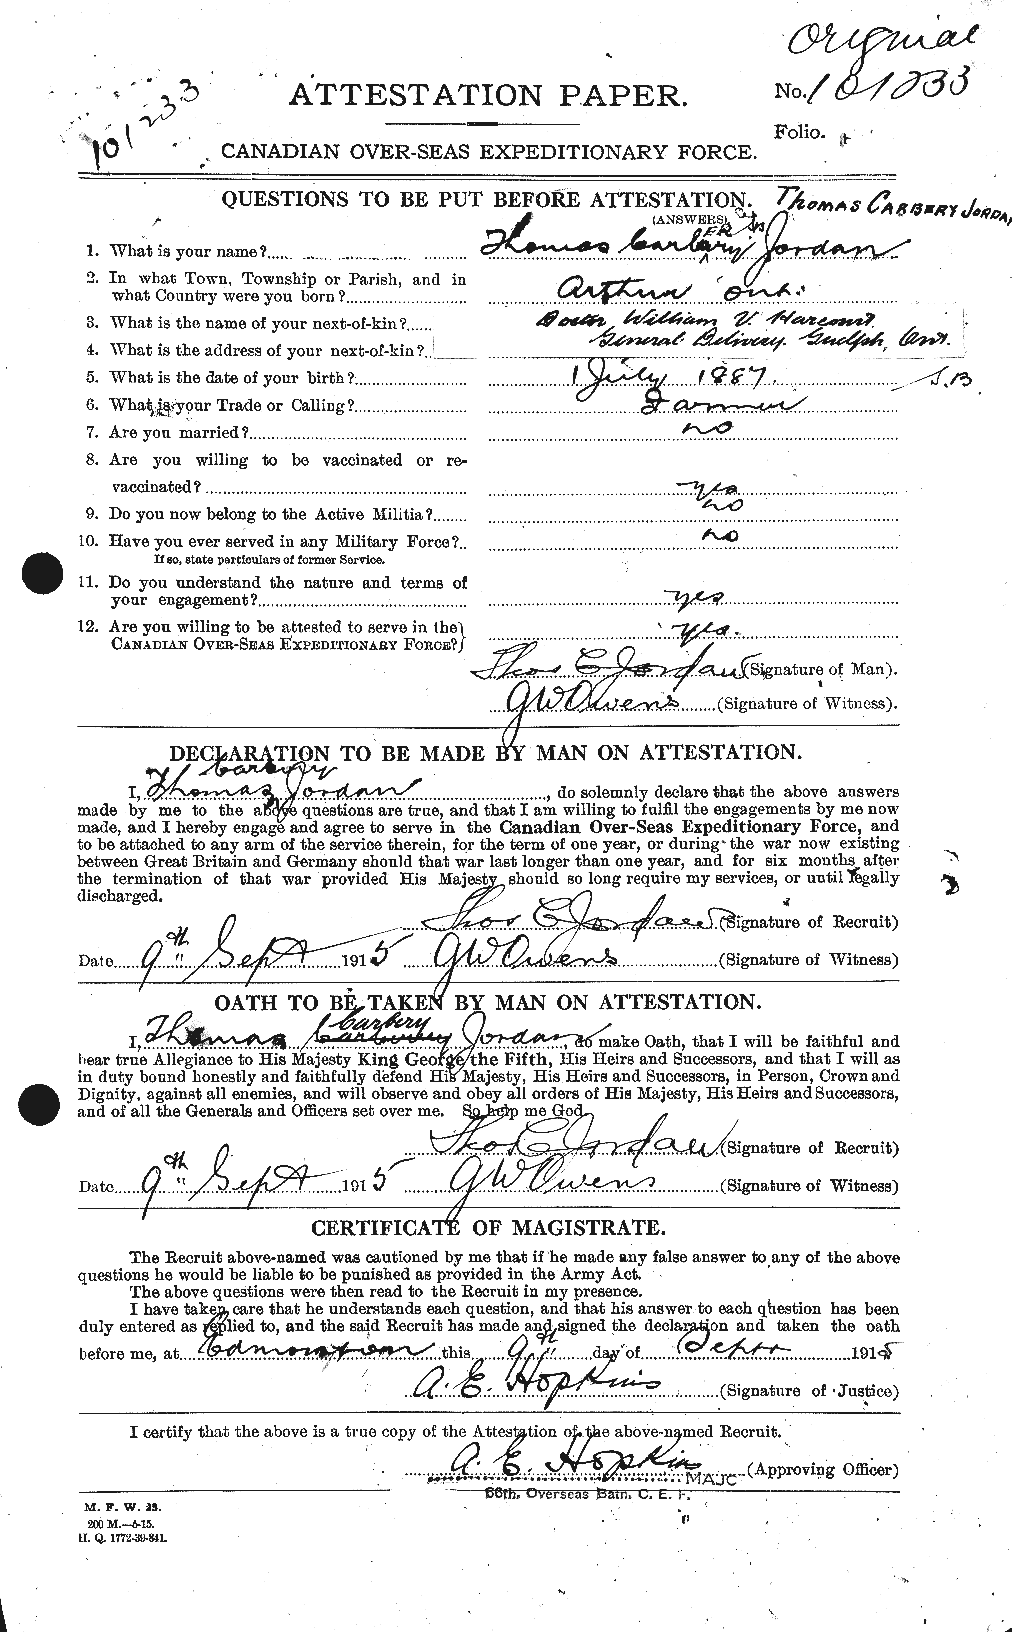 Personnel Records of the First World War - CEF 424443a